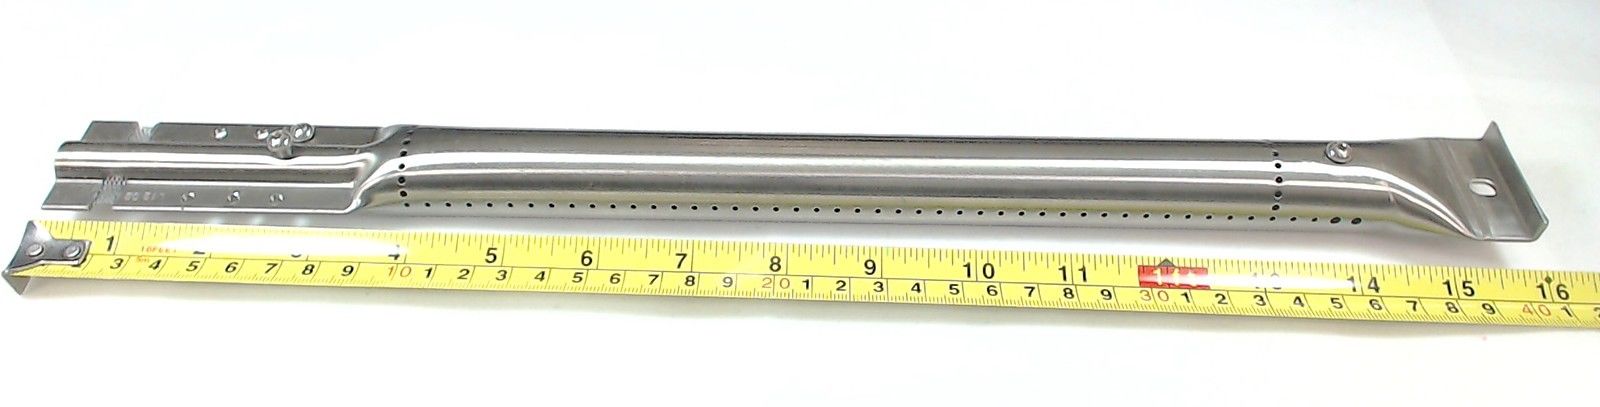 Gas Grill Stainless Steel Tube Burner for Charbroil, 80005591 - image 1 of 2